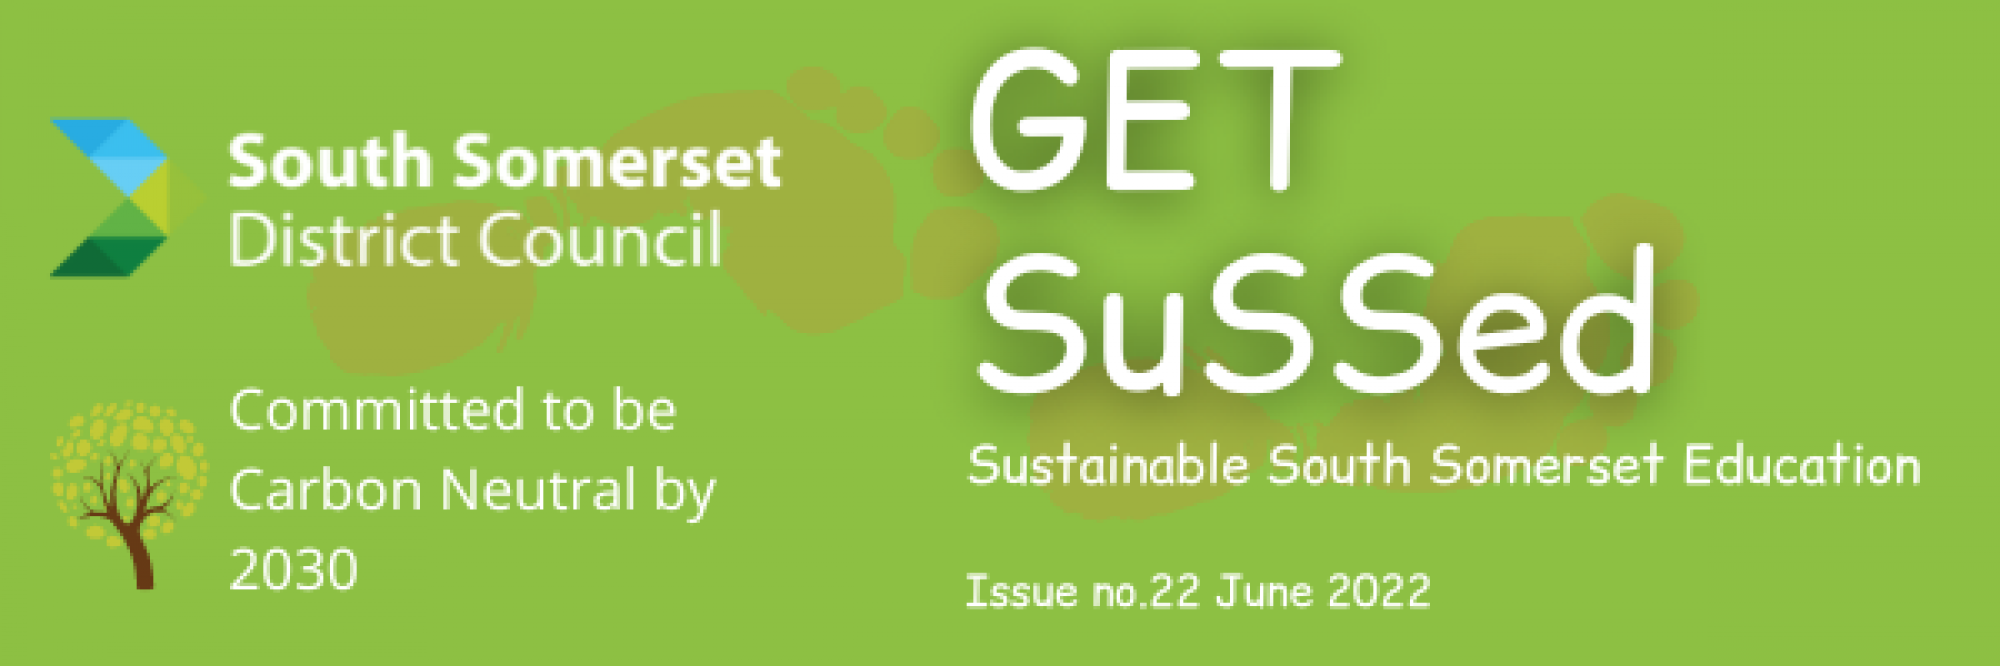 💚 Great Green News! - Get SuSSed from South Somerset District Council 💚